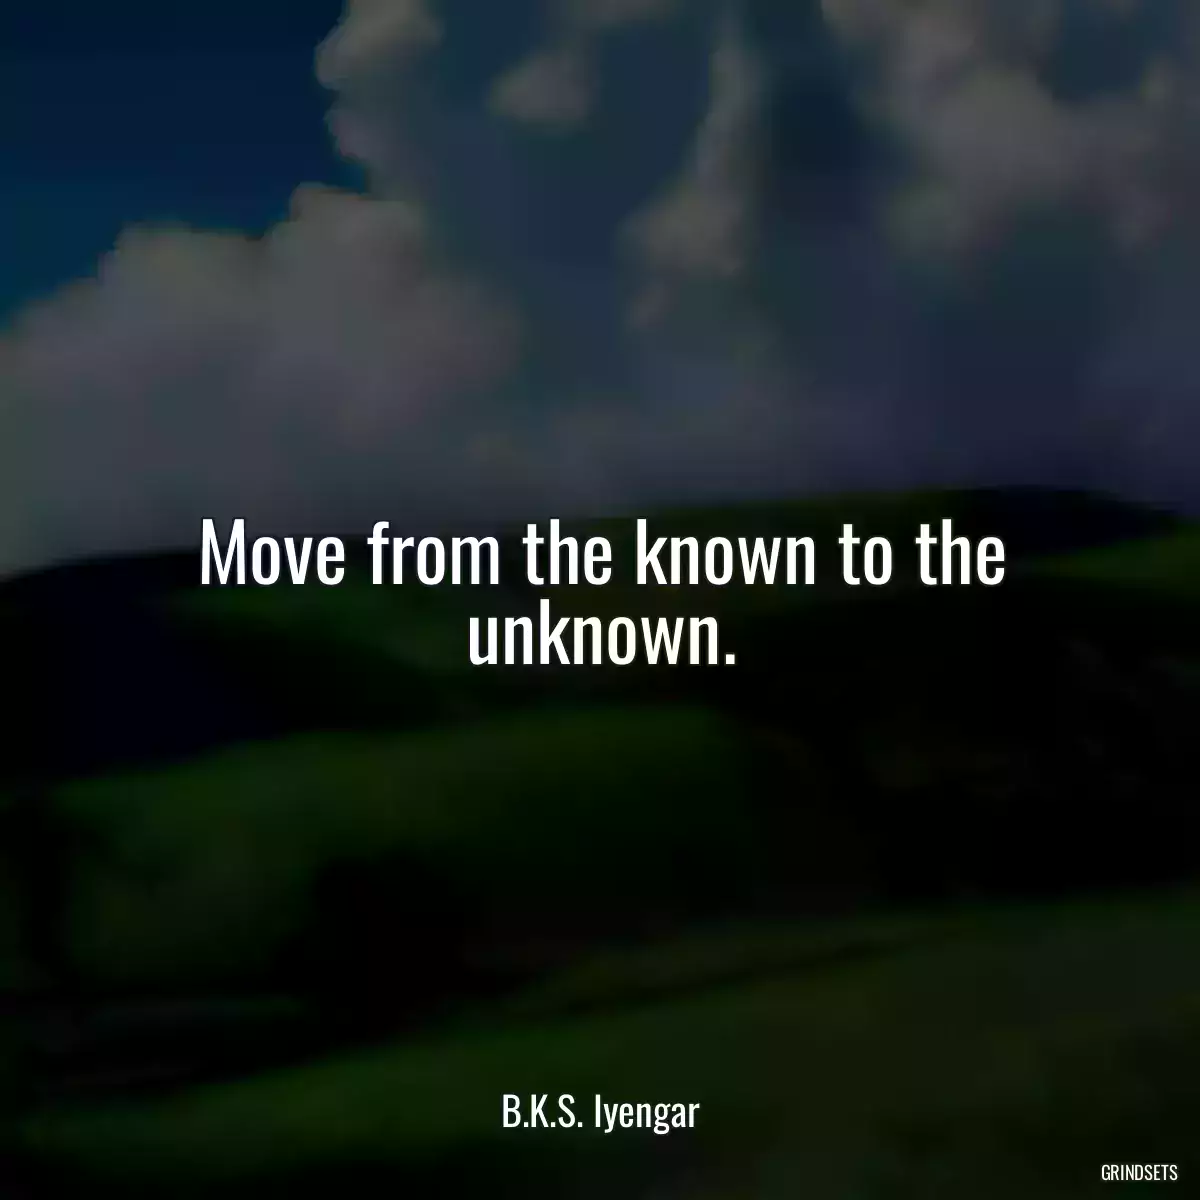 Move from the known to the unknown.